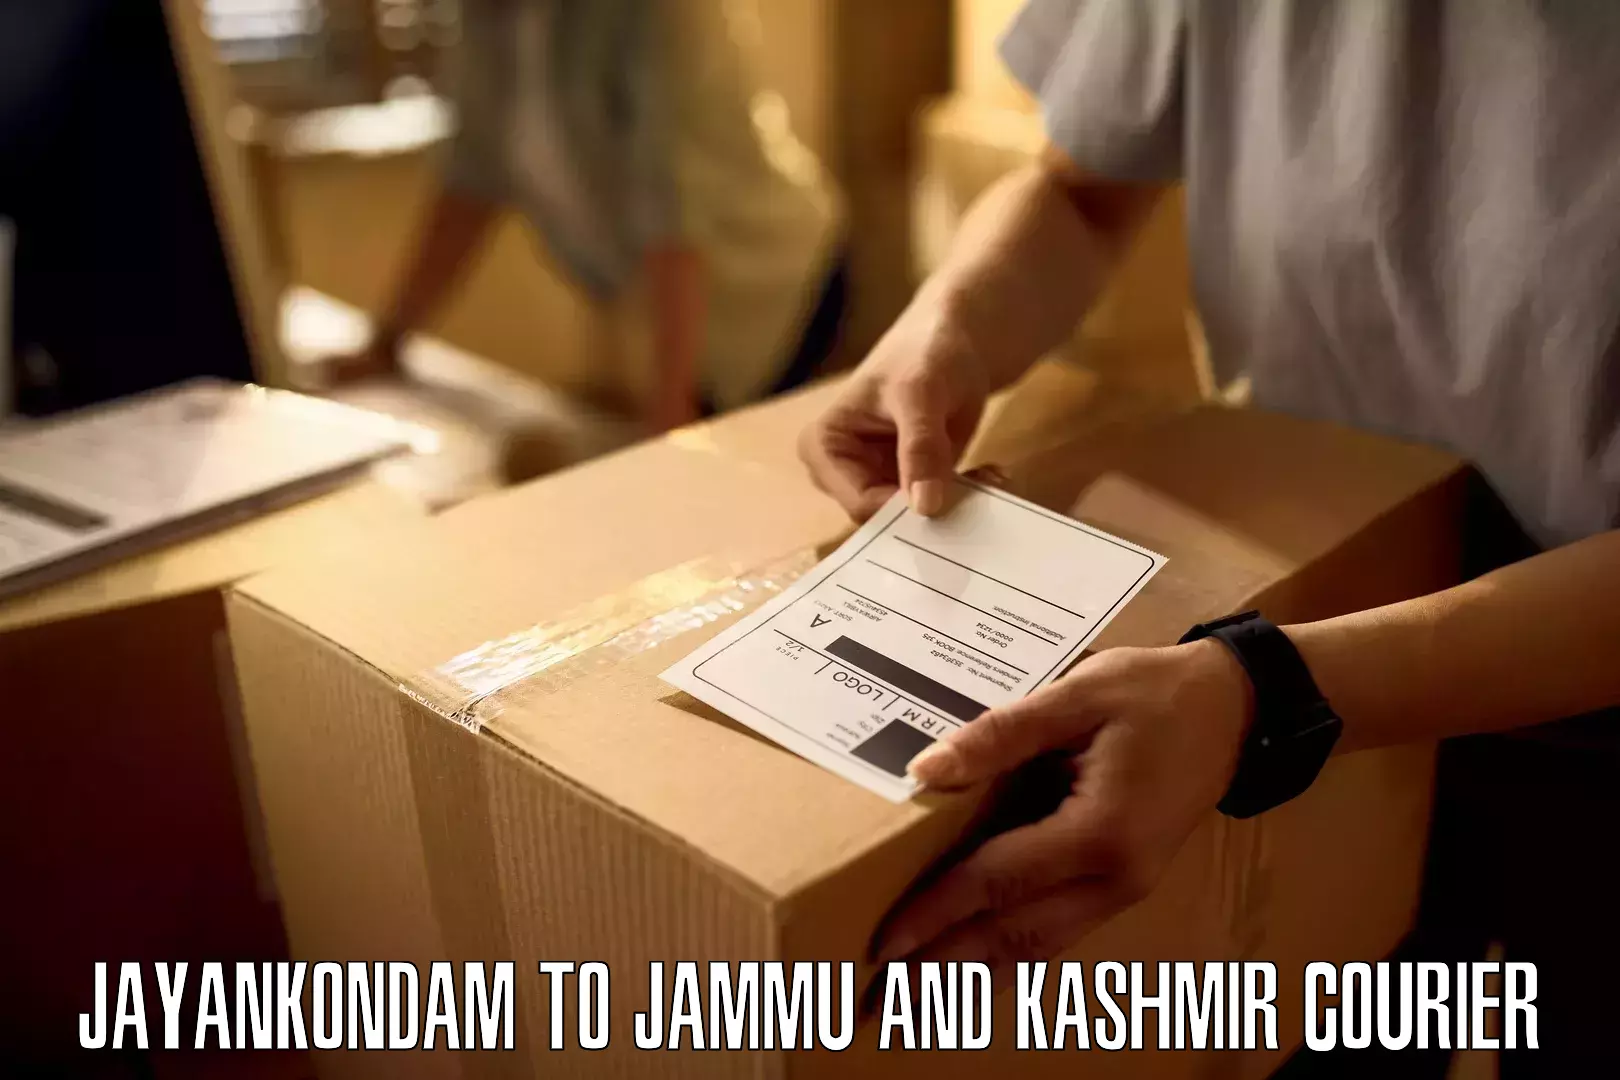 Secure package delivery Jayankondam to Pulwama